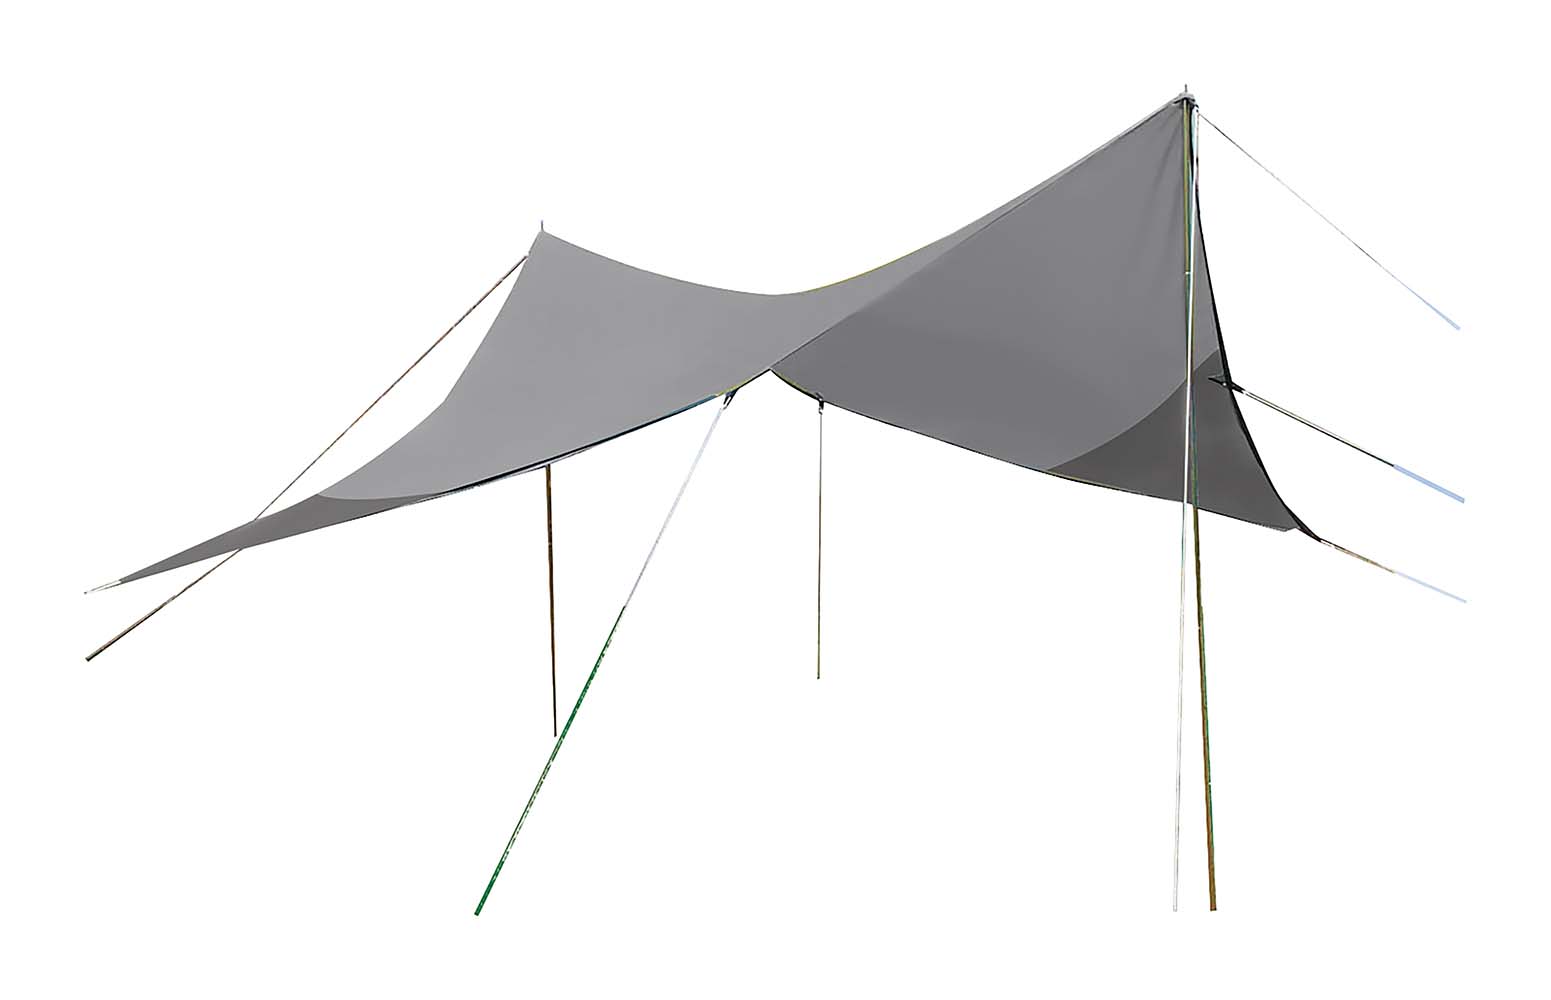 4471493 A 4-sided tarp. To be used in the shape of a diamond or in the shape of a square. Creates quickly and easily a canopy and a shaded area. This tarp is waterproof due to the 150D polyester fabric with PU coating and a water column of 2000 mm and provided with a UV-resistant coating. Easy to hang at the desired location with the supplied guy ropes and pegs. Includes handy carrying bag (tarp poles not included).